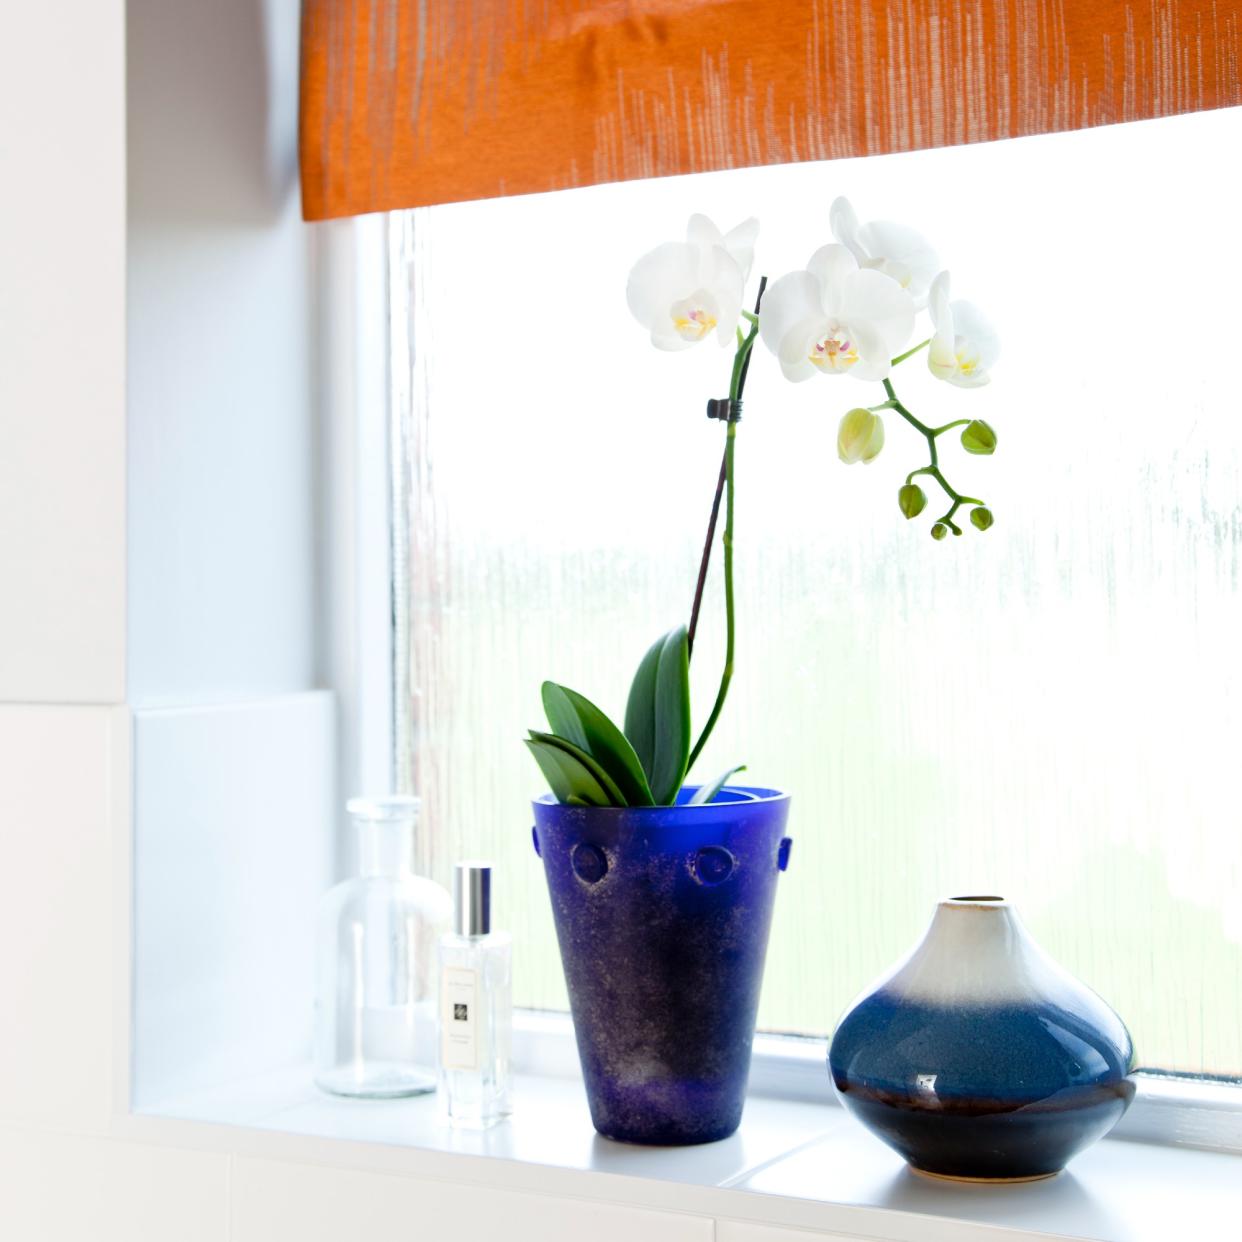  A white orchid plant on a bathroom window sill. 